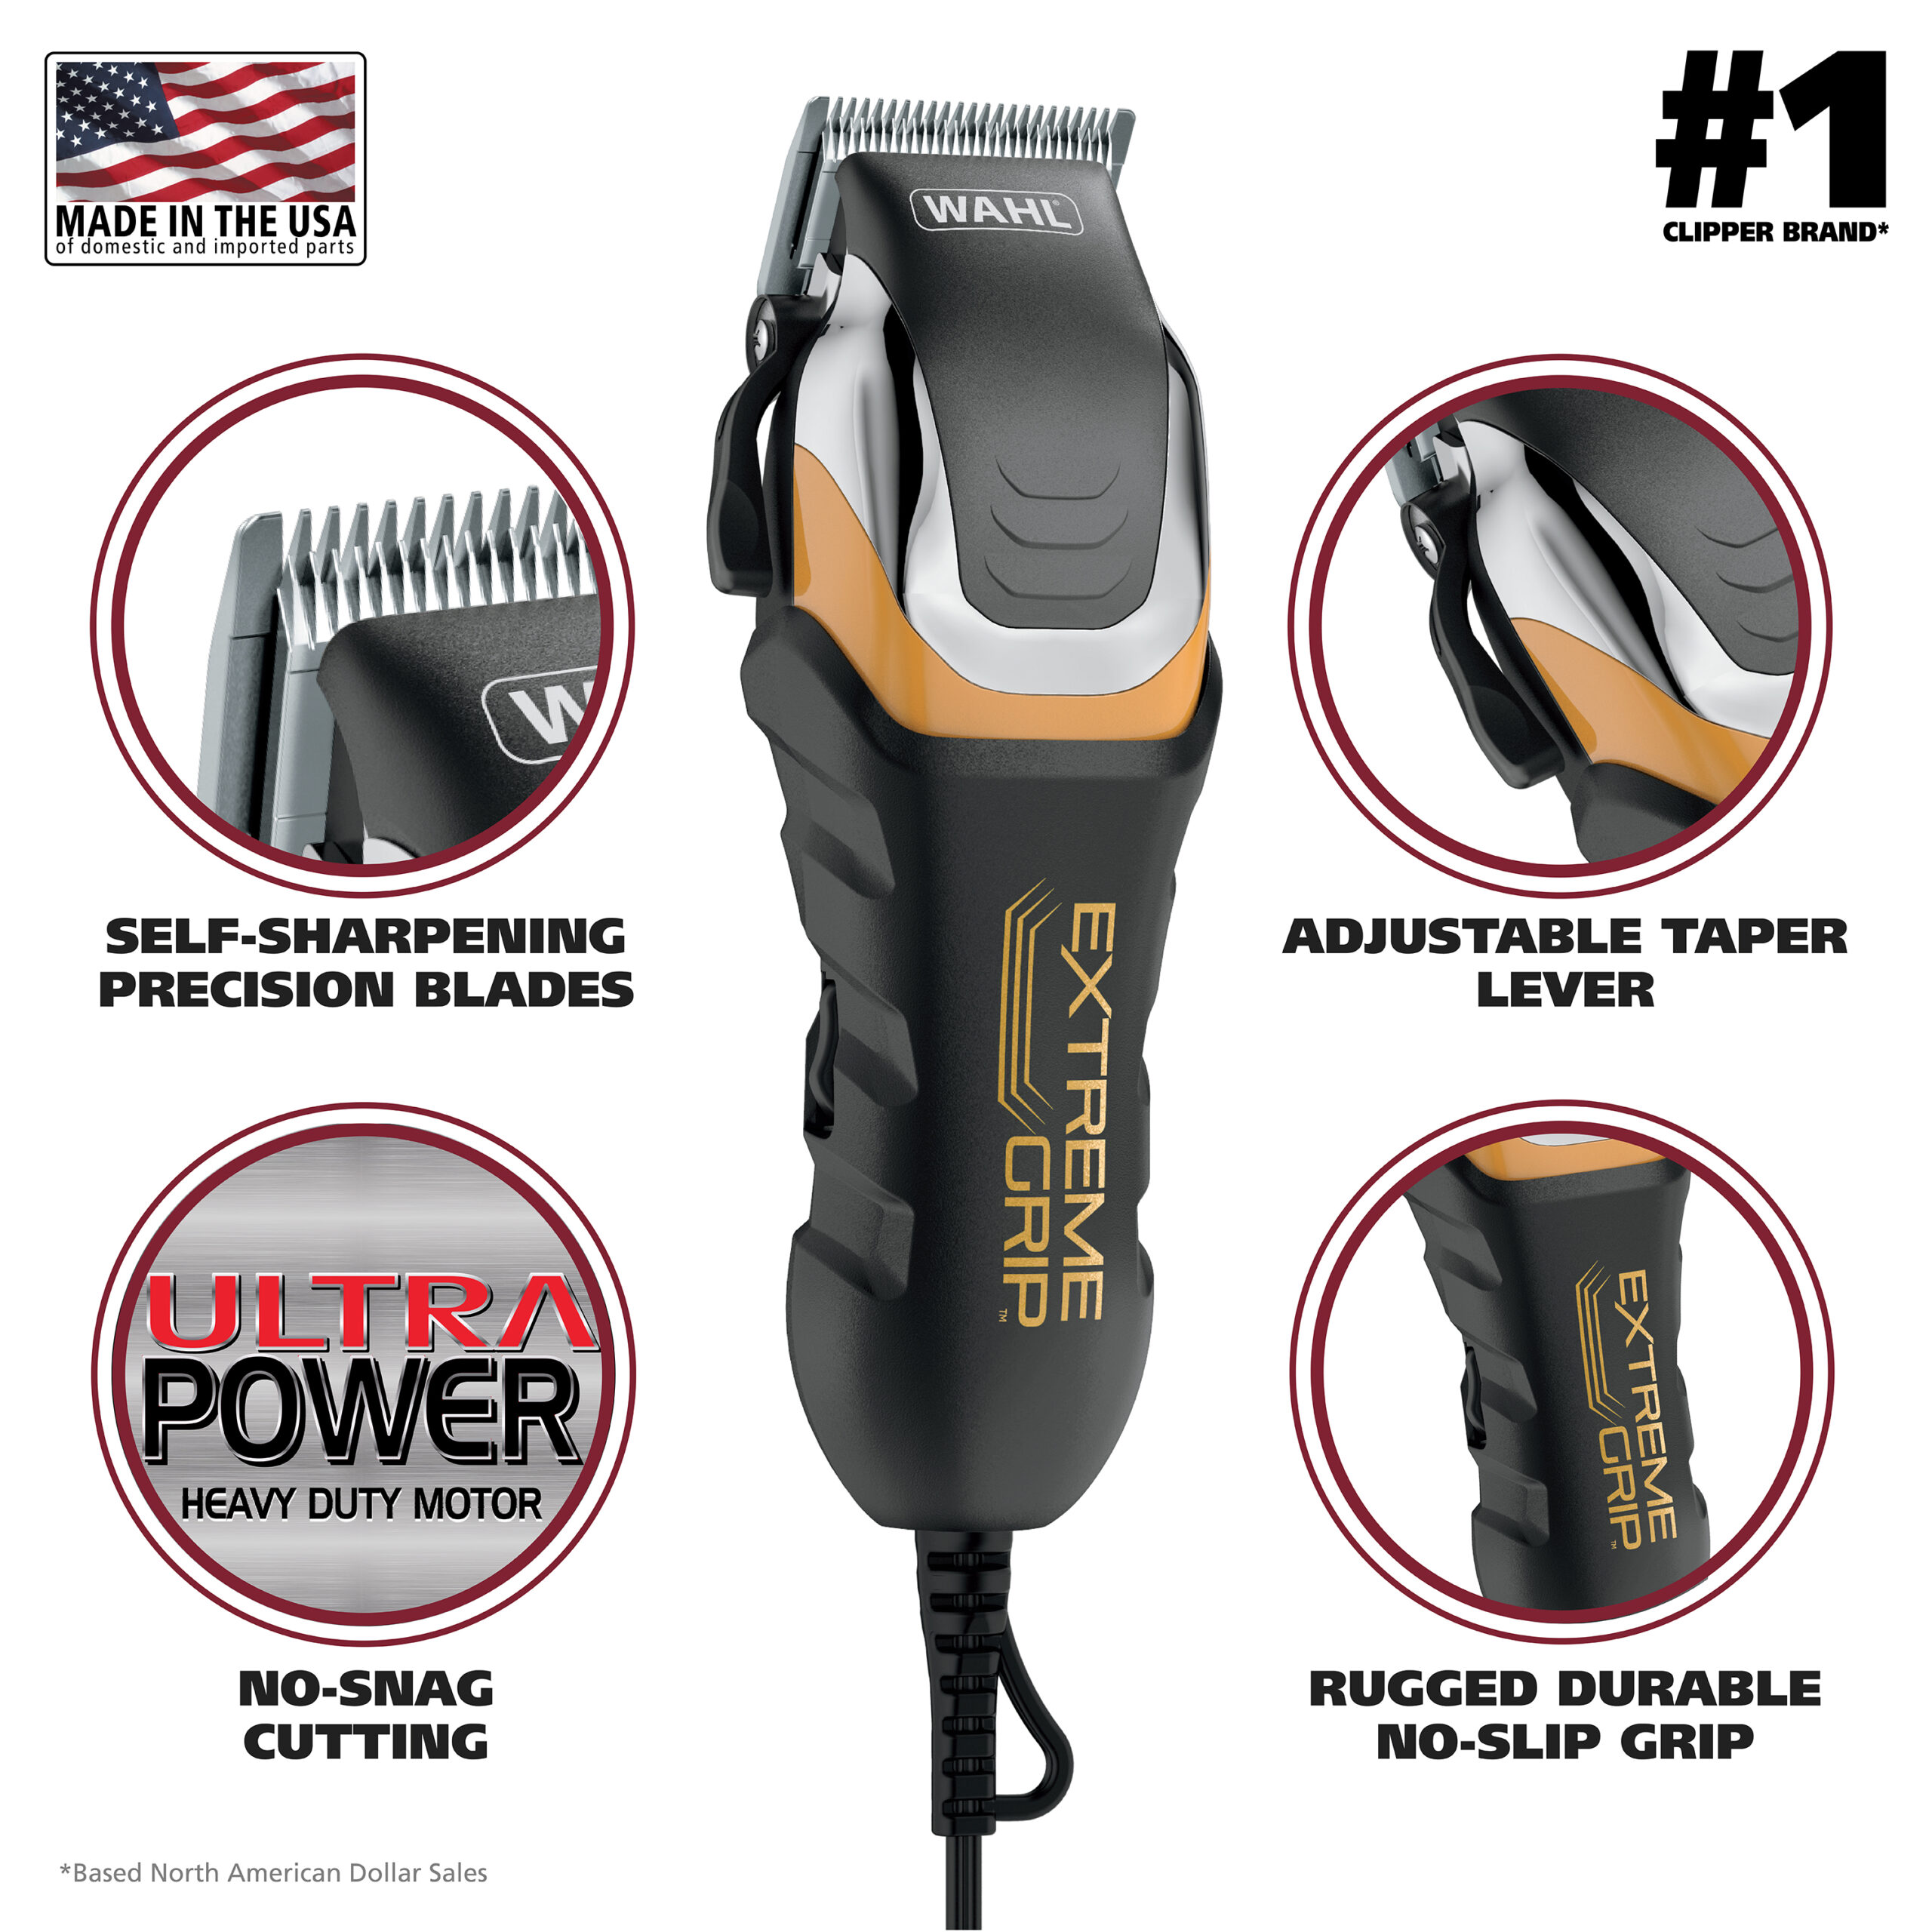 wahl extreme grip pro hair clipper